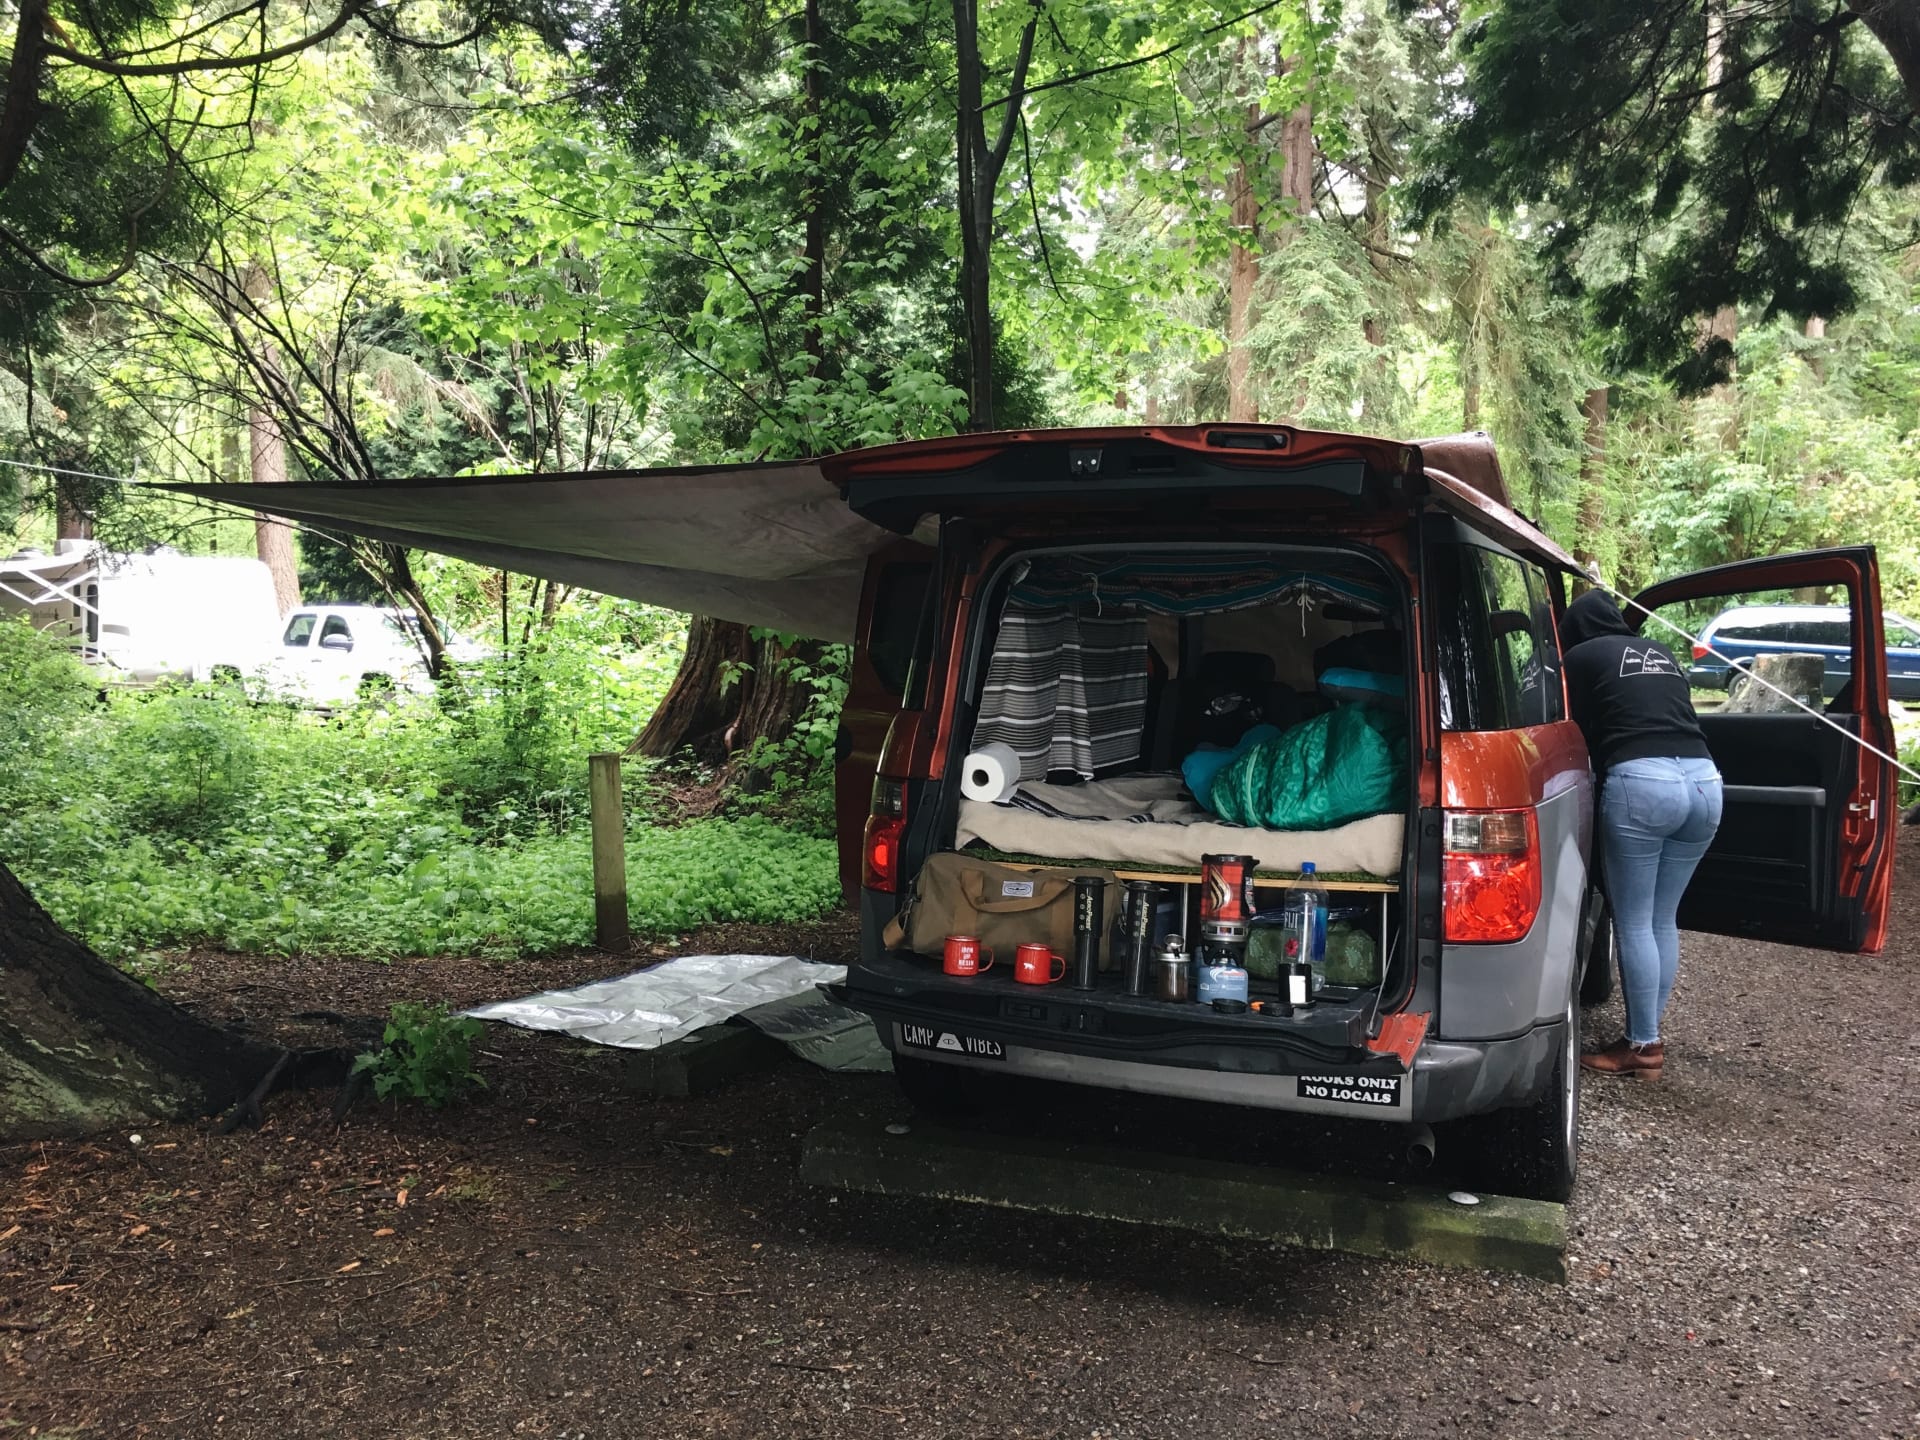 Our two week camp set up, first time trying it out. worked really well